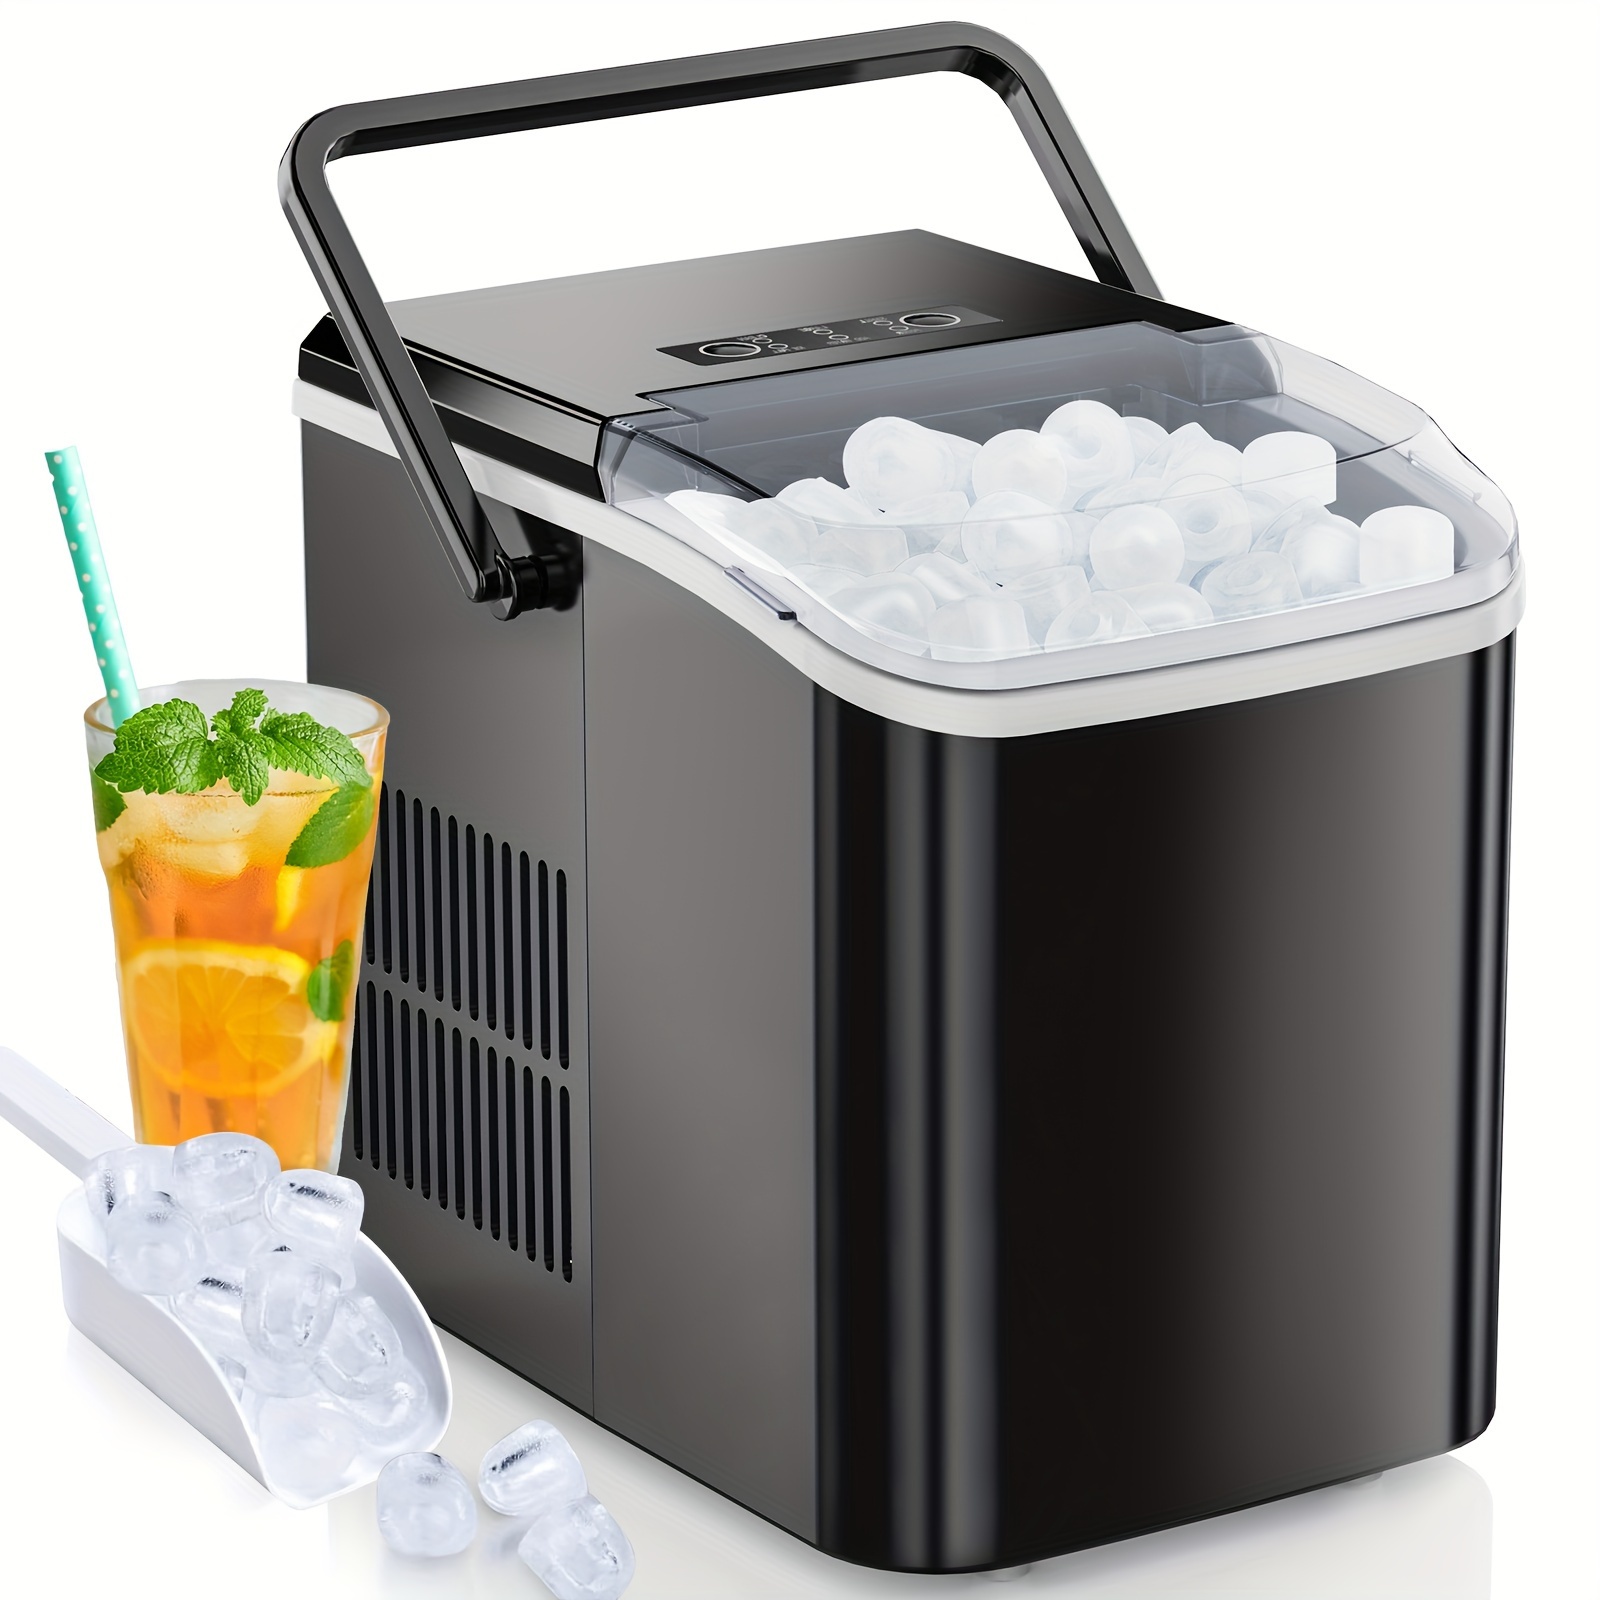 

Countertop Ice Maker, Portable Ice Machine Self-cleaning, 9 Cubes In 6 Mins, 26.5lbs/, 2 Sizes Of Bullet Ice, With Ice Scoop, Basket And Handle, Ice Cube Maker For Home Kitchen Party, Black